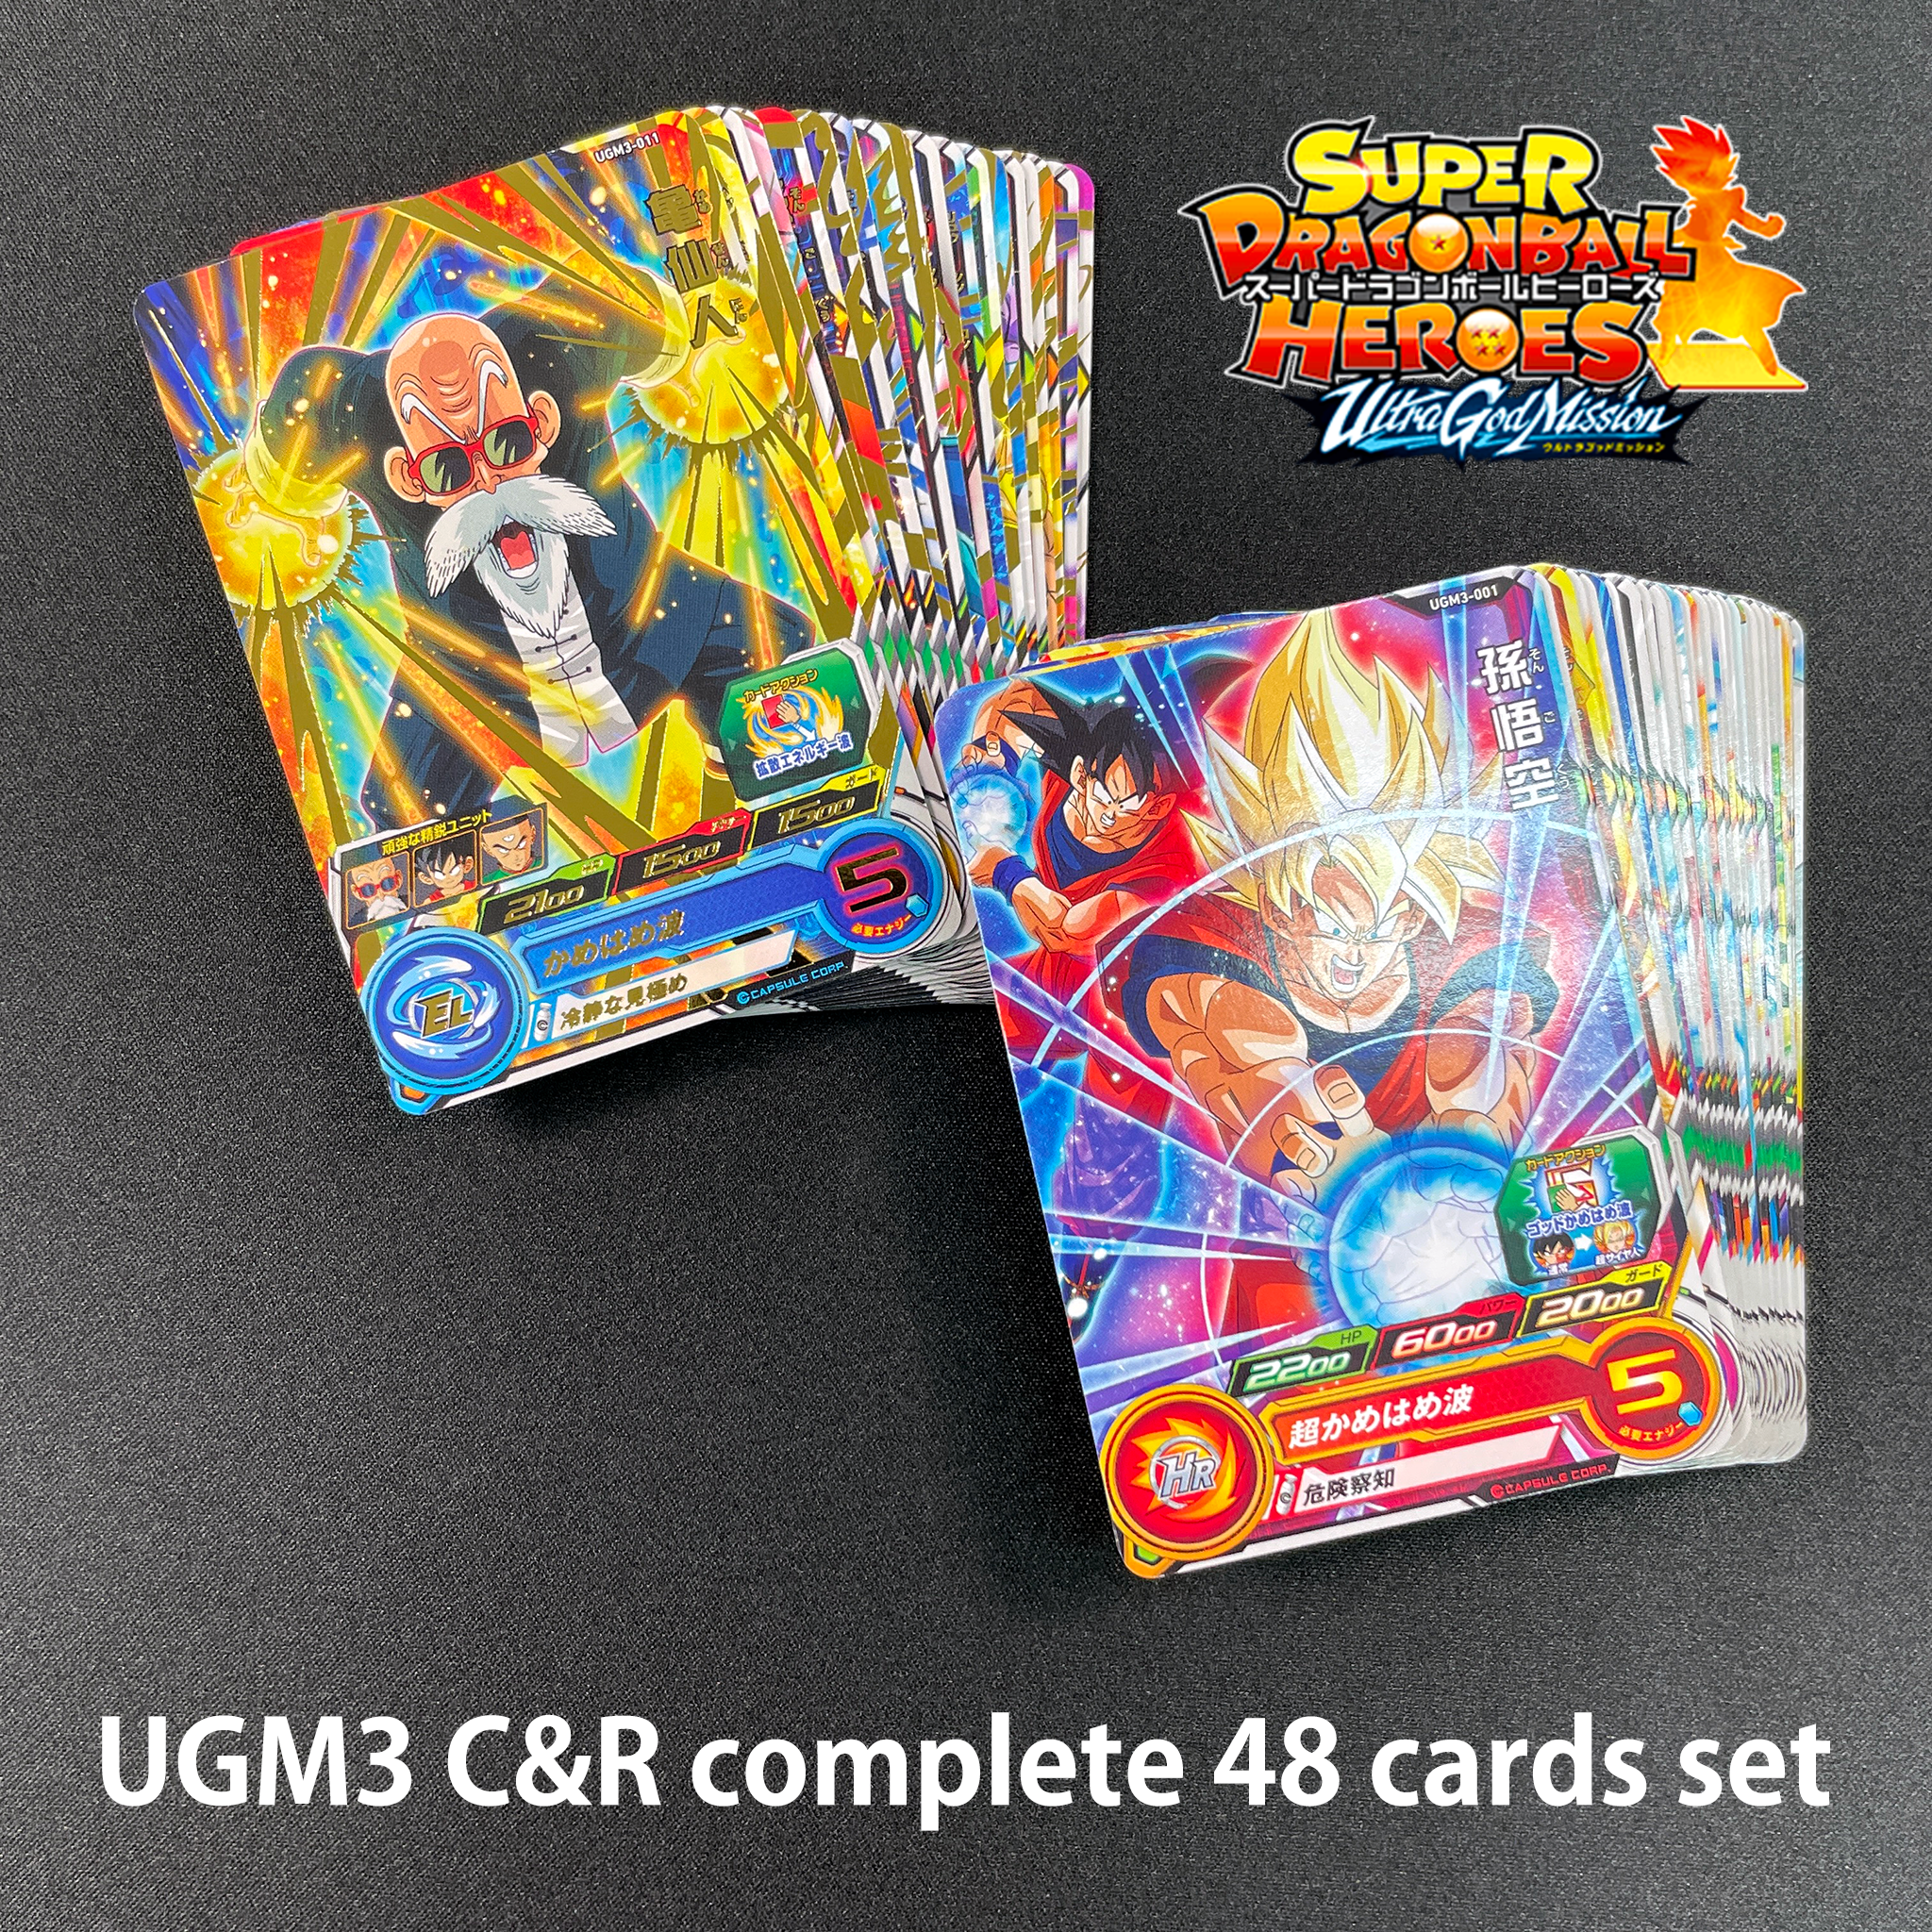 SUPER DRAGON BALL HEROES ULTRA GOD MISSION 3 C&R complete 48 cards set  30 Common cards 18 Rare cards